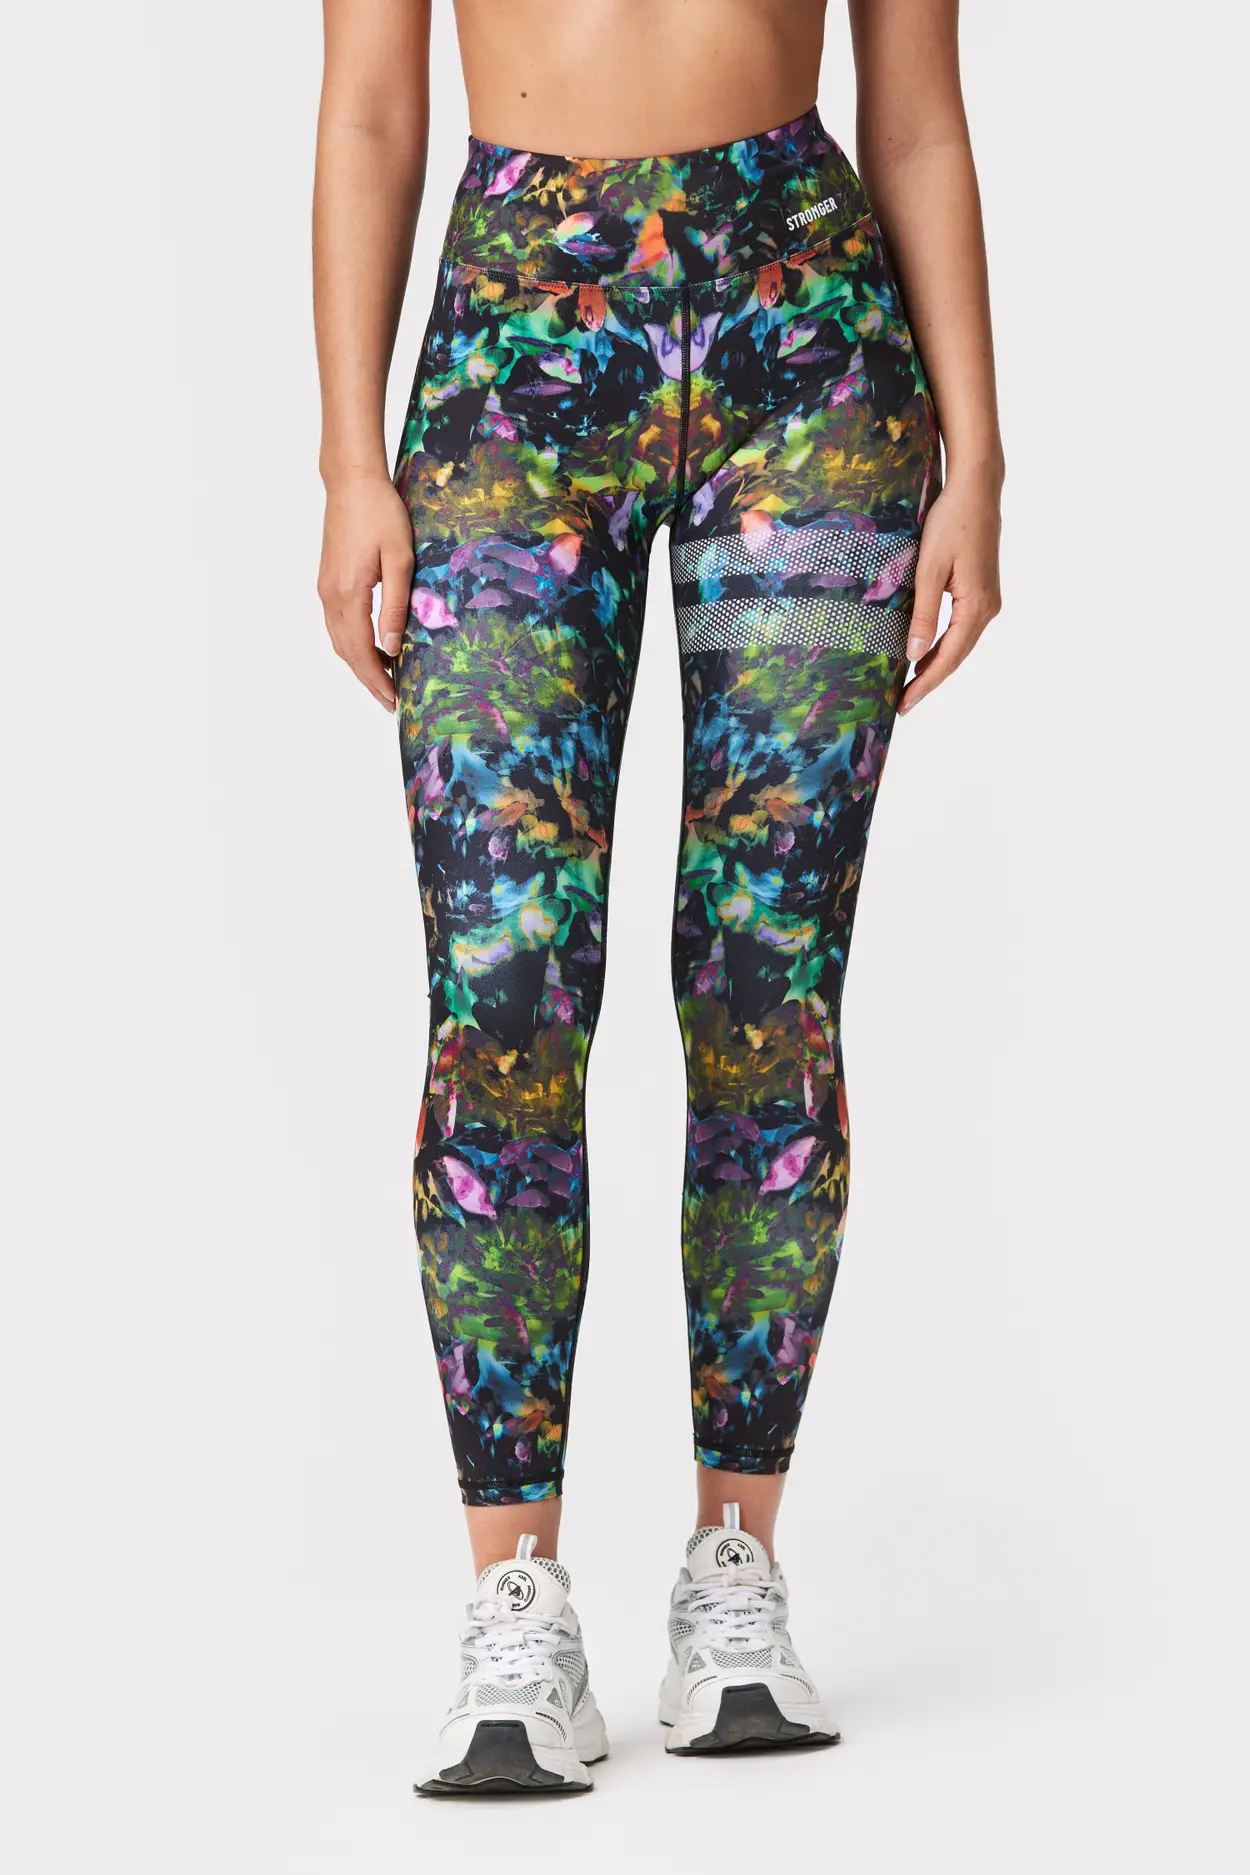 Find Printed legging by Attract LEGGING near me